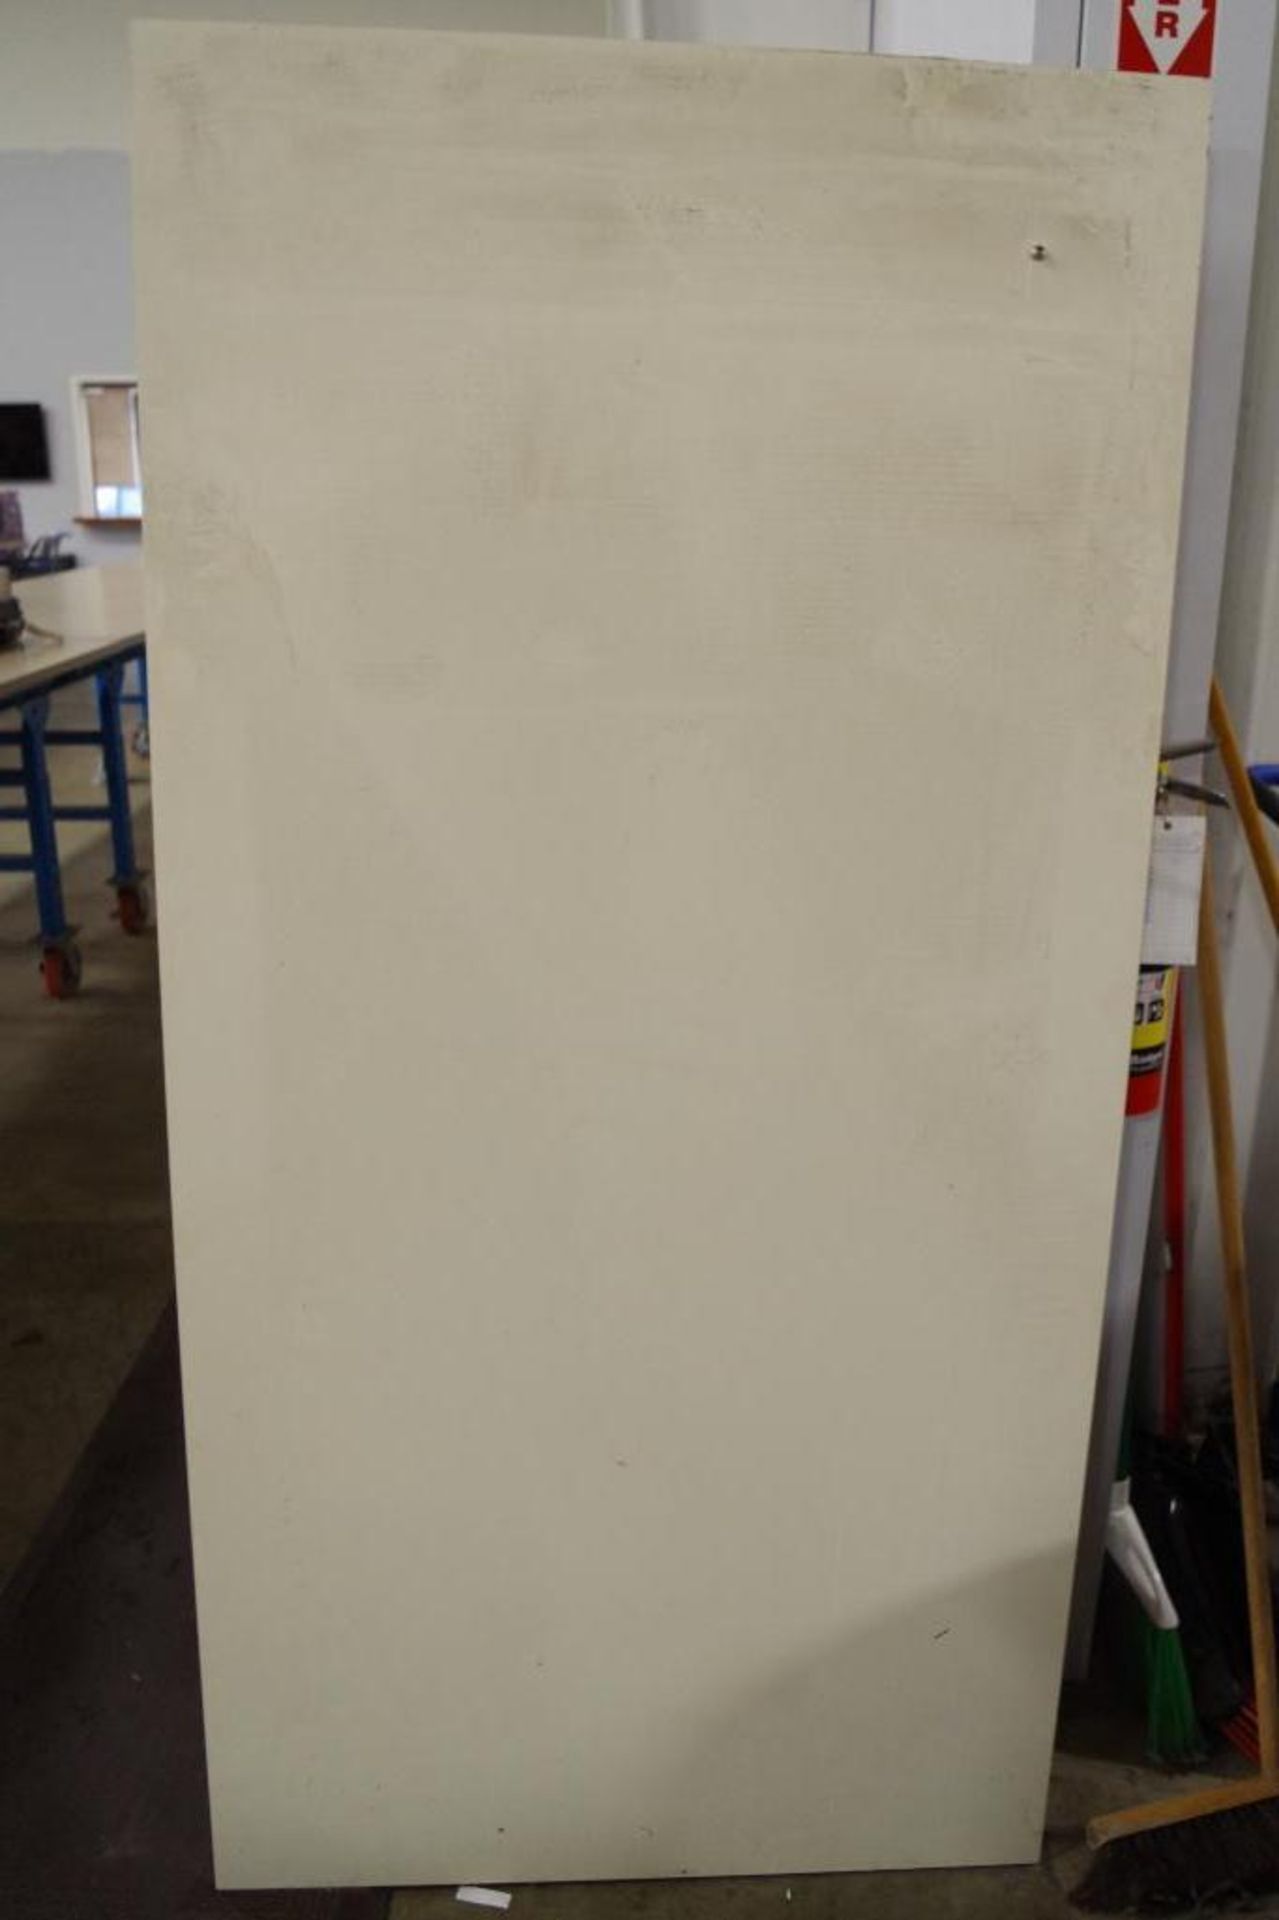 Melamine Laminated White Workbench Top 36" x 72" x 1/1/8" (Dusty & Some Scratches, Please Preview) - Image 2 of 2